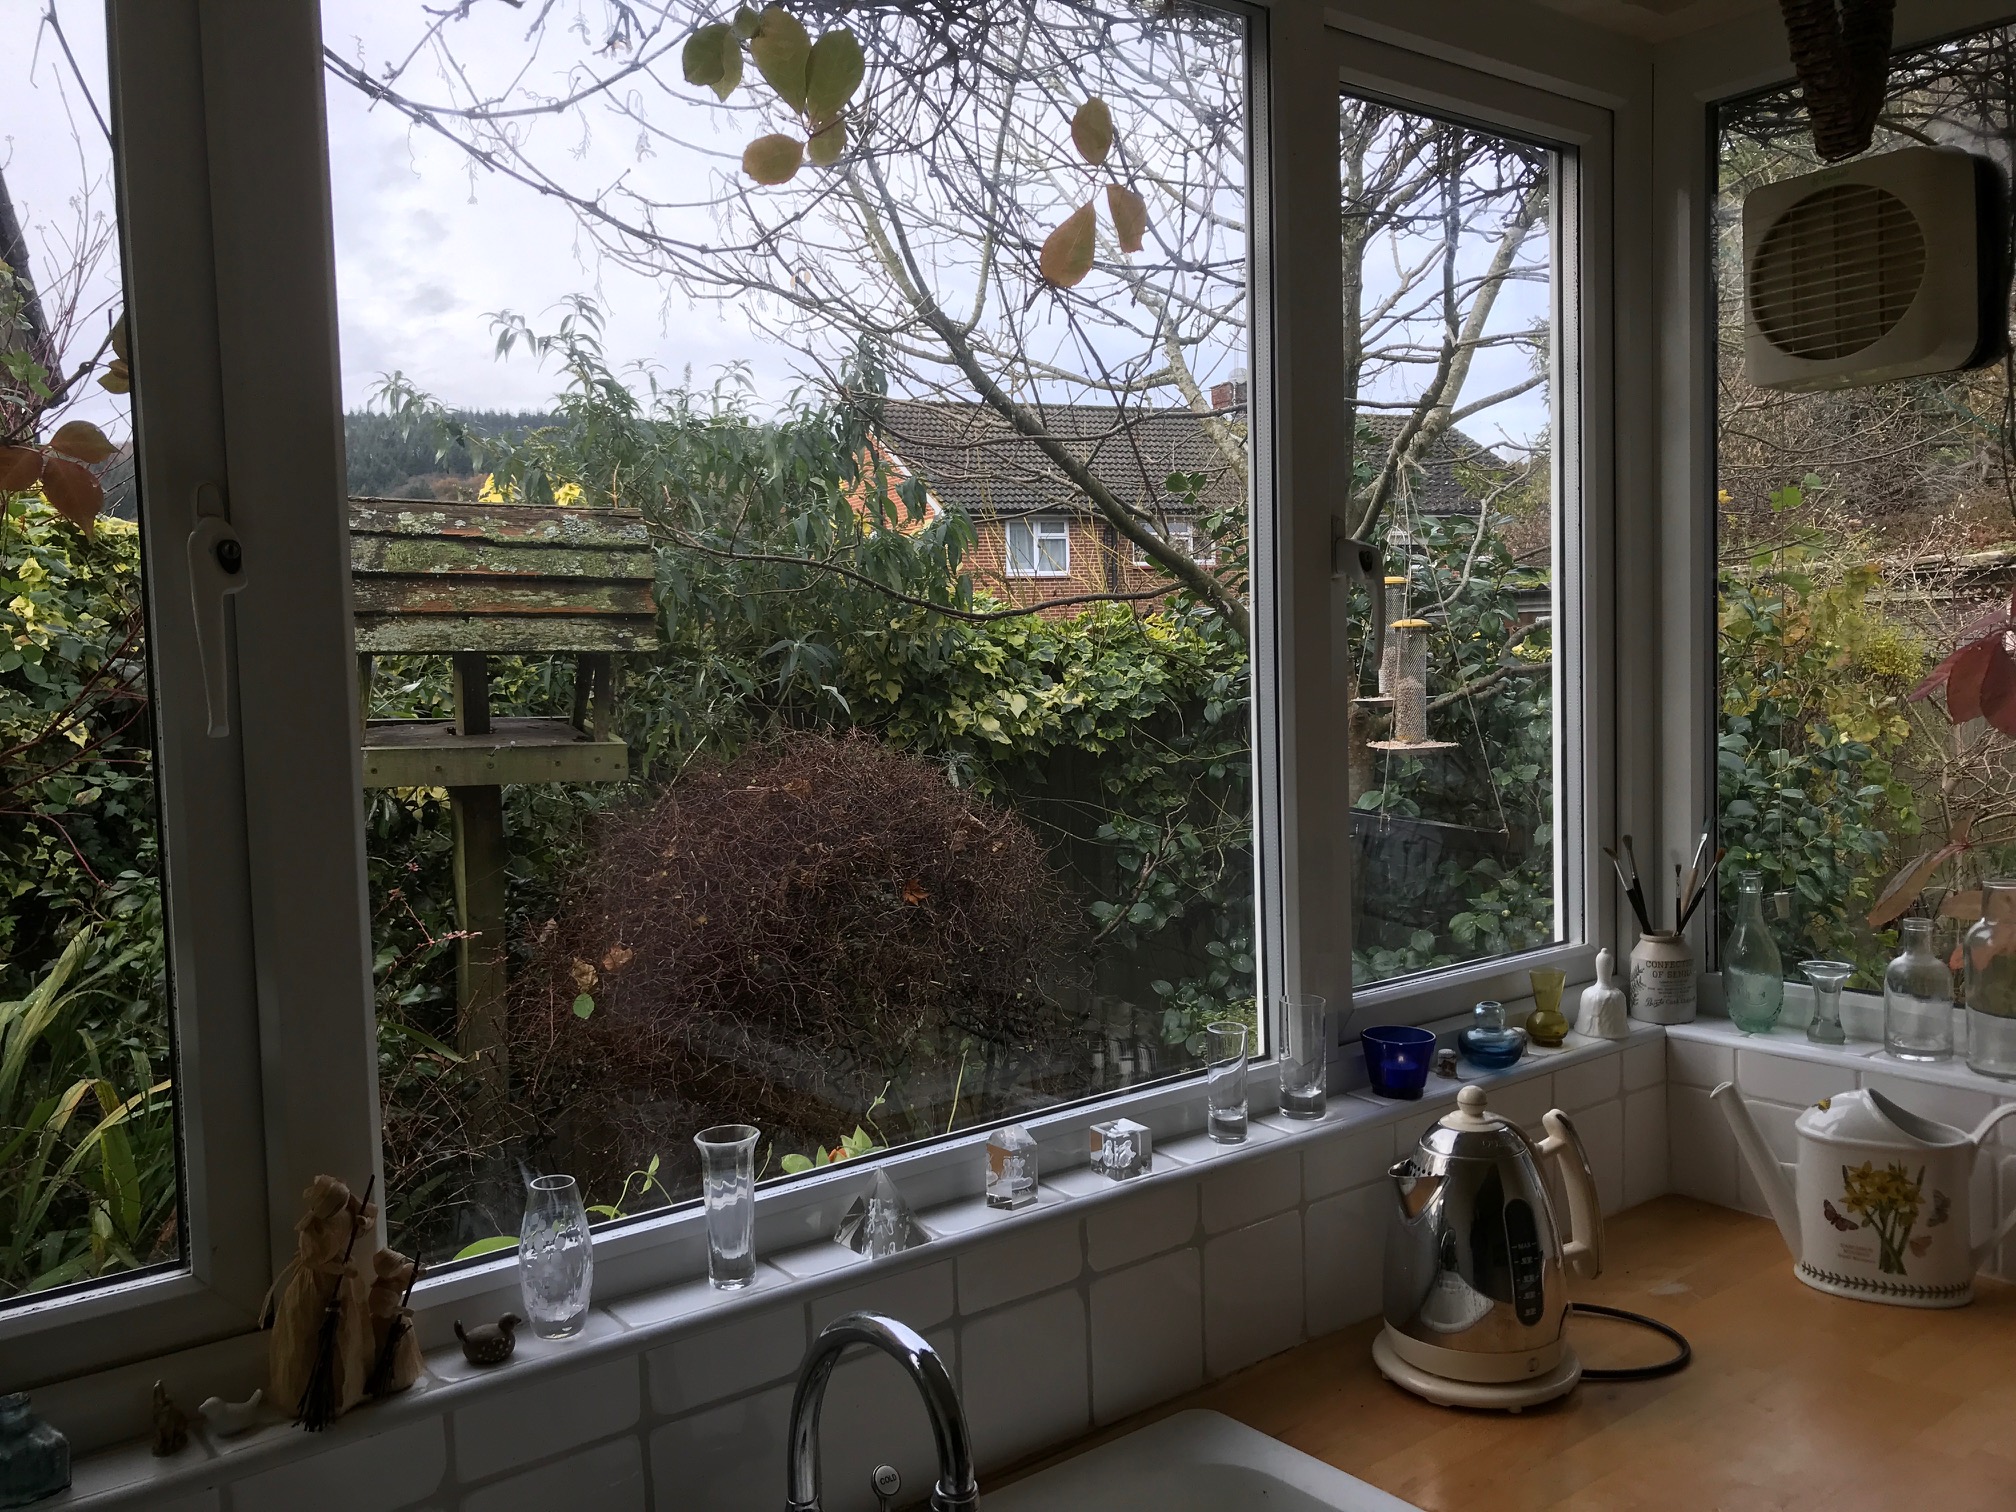 The Kitchen Window: The view of the Bird Table and Feeders.